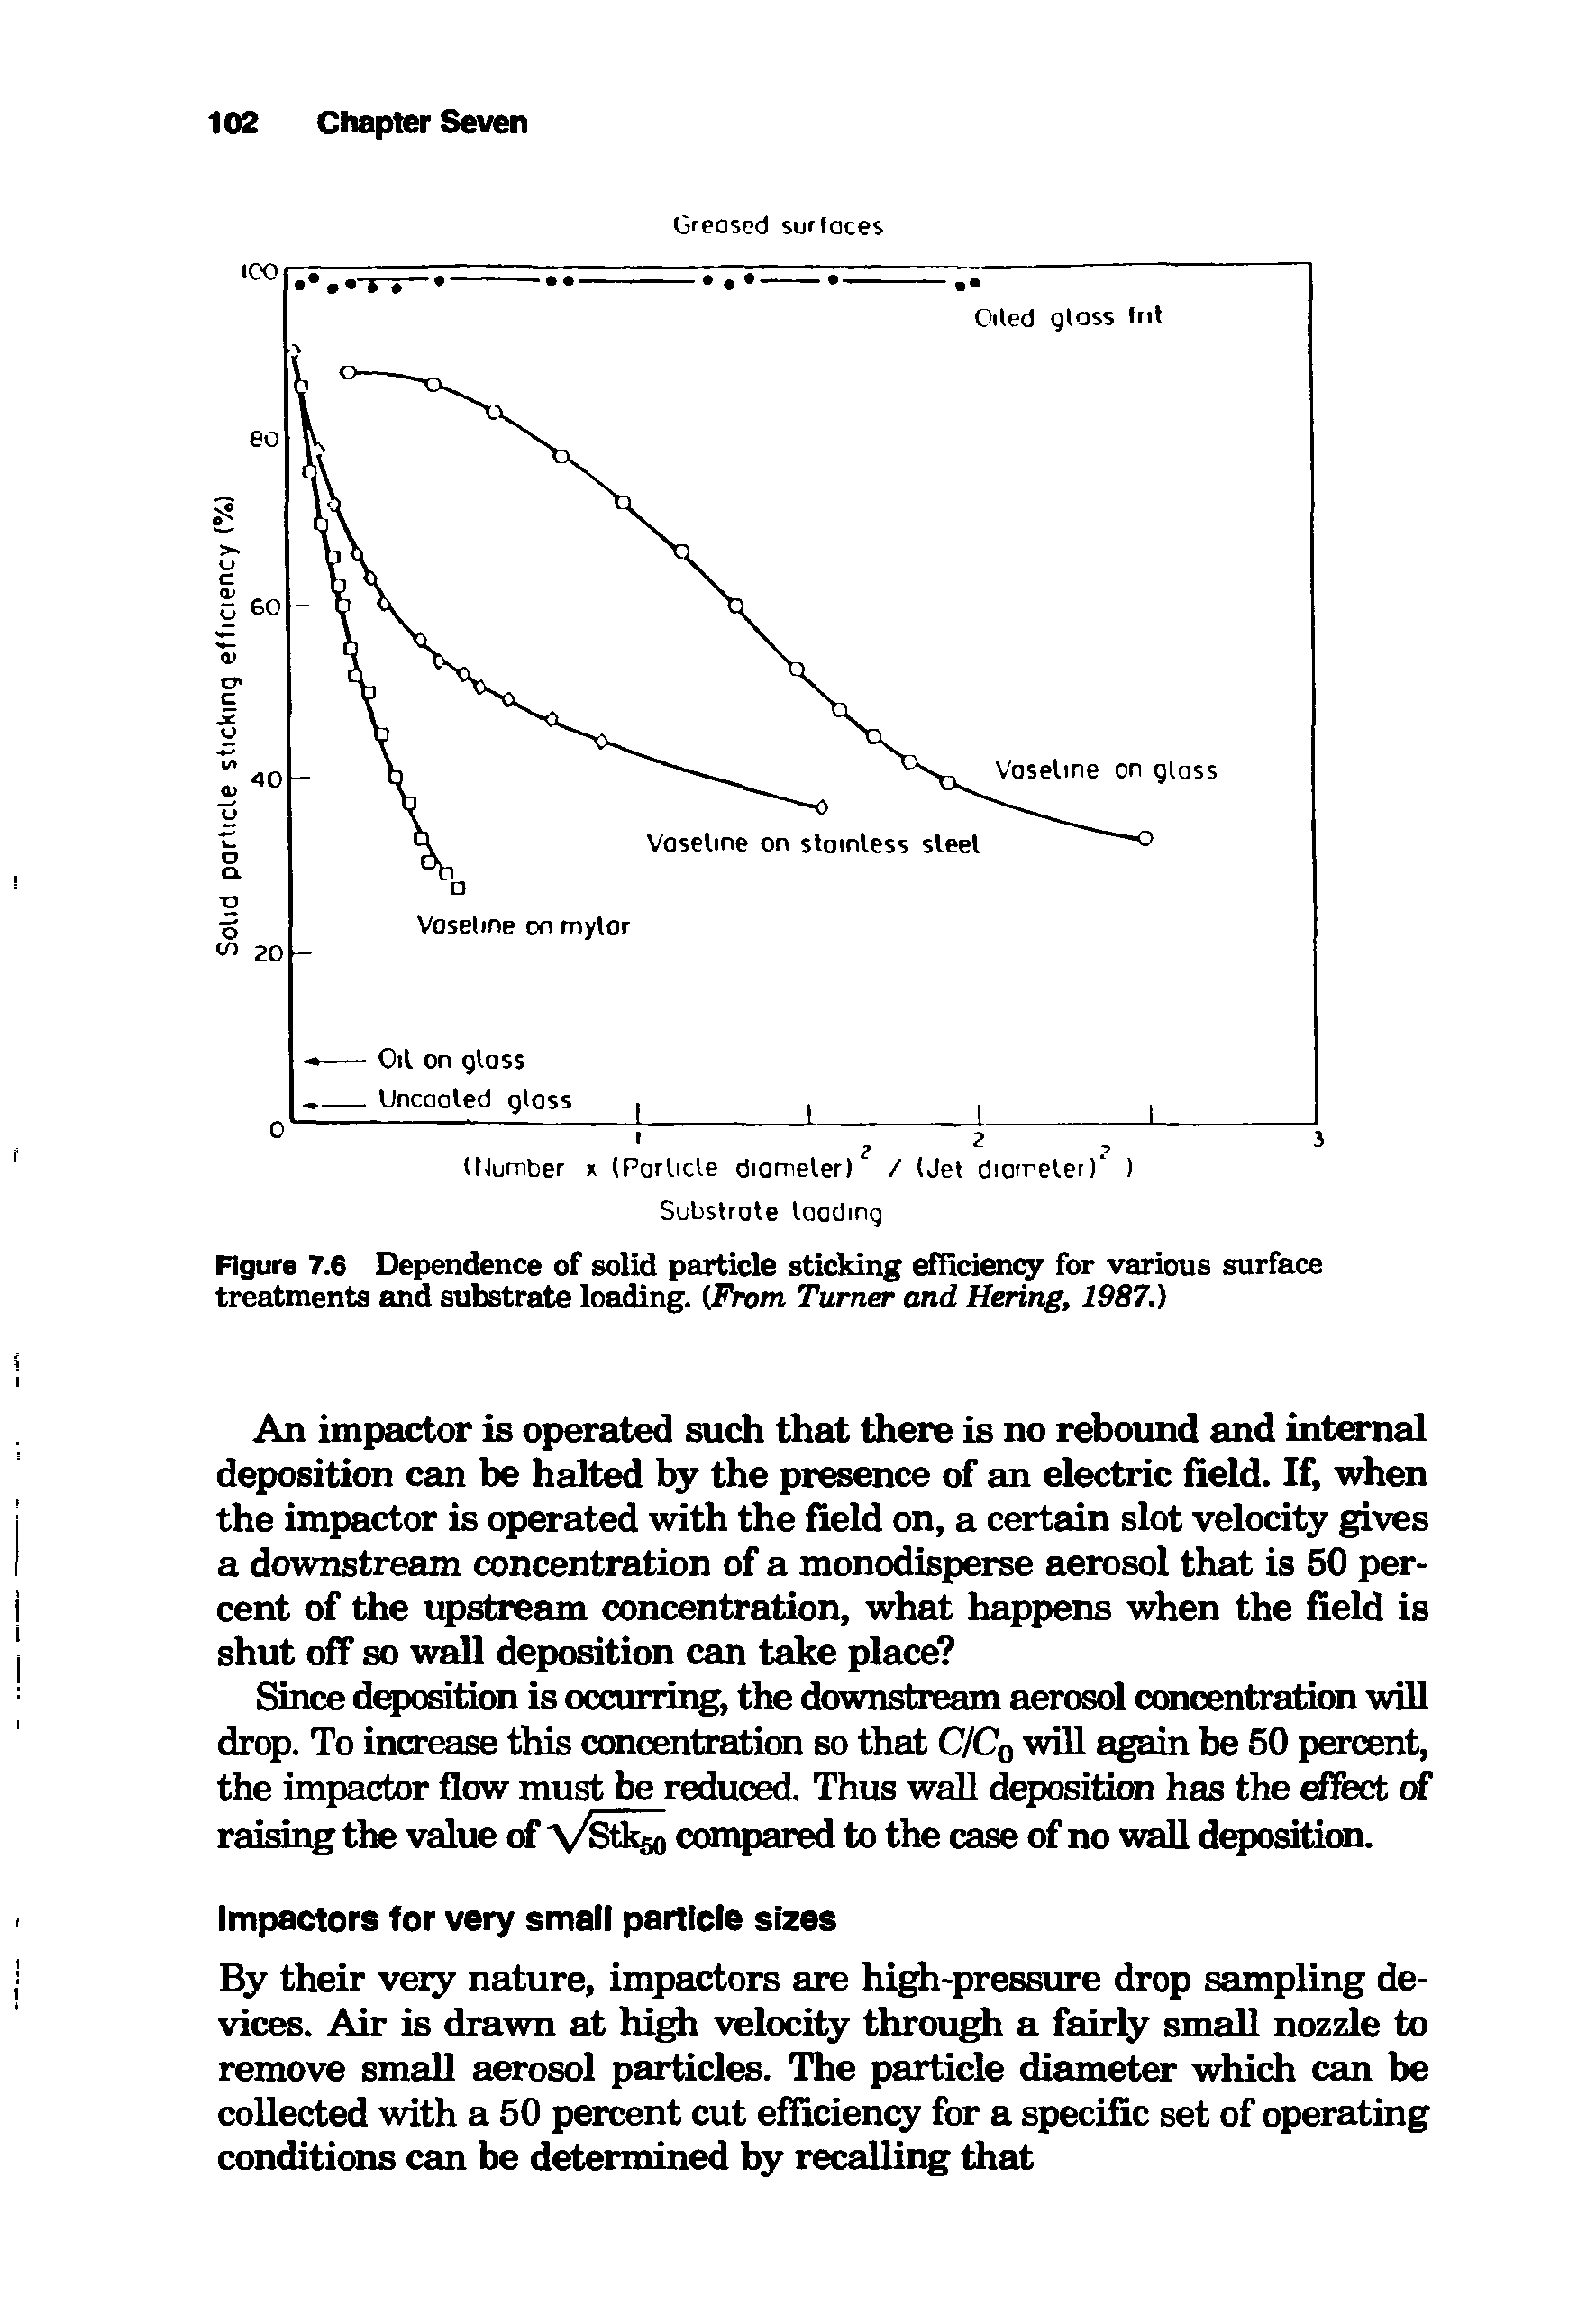 Figure 7.6 Dependence of solid particle sticking efficiency for various surface treatments and substrate loading. From Turner and Hering, 1987.)...